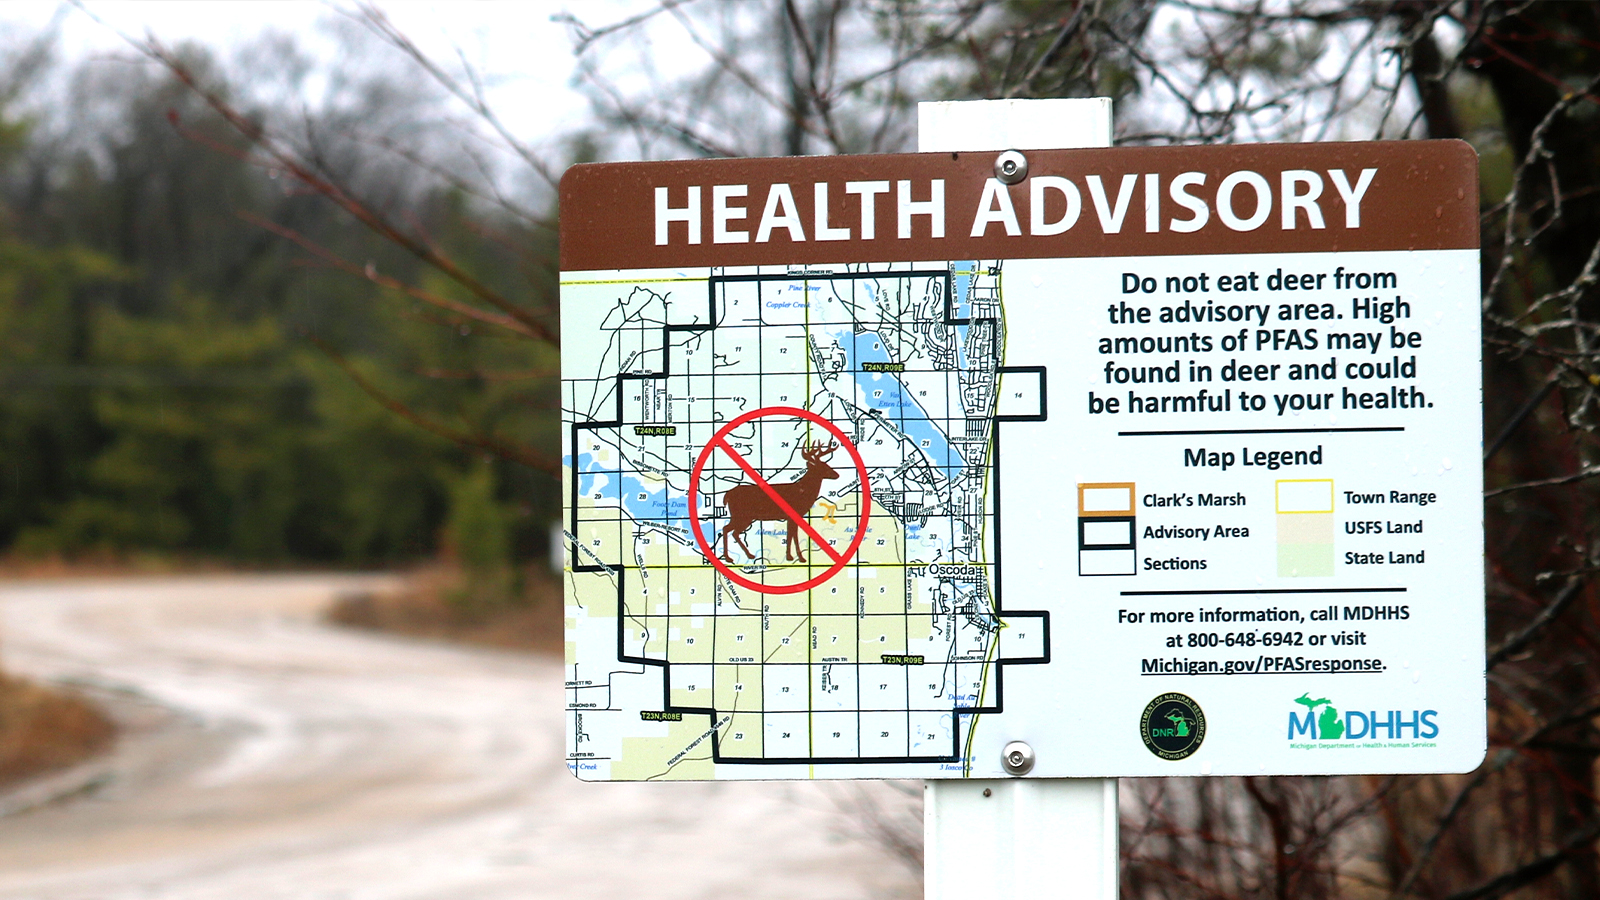 a health advisory sign says "do not eat deer from the advisory area. high amounts of pfas may be found in deer and could be harmful to your health" while showing a map of the surrounding are.